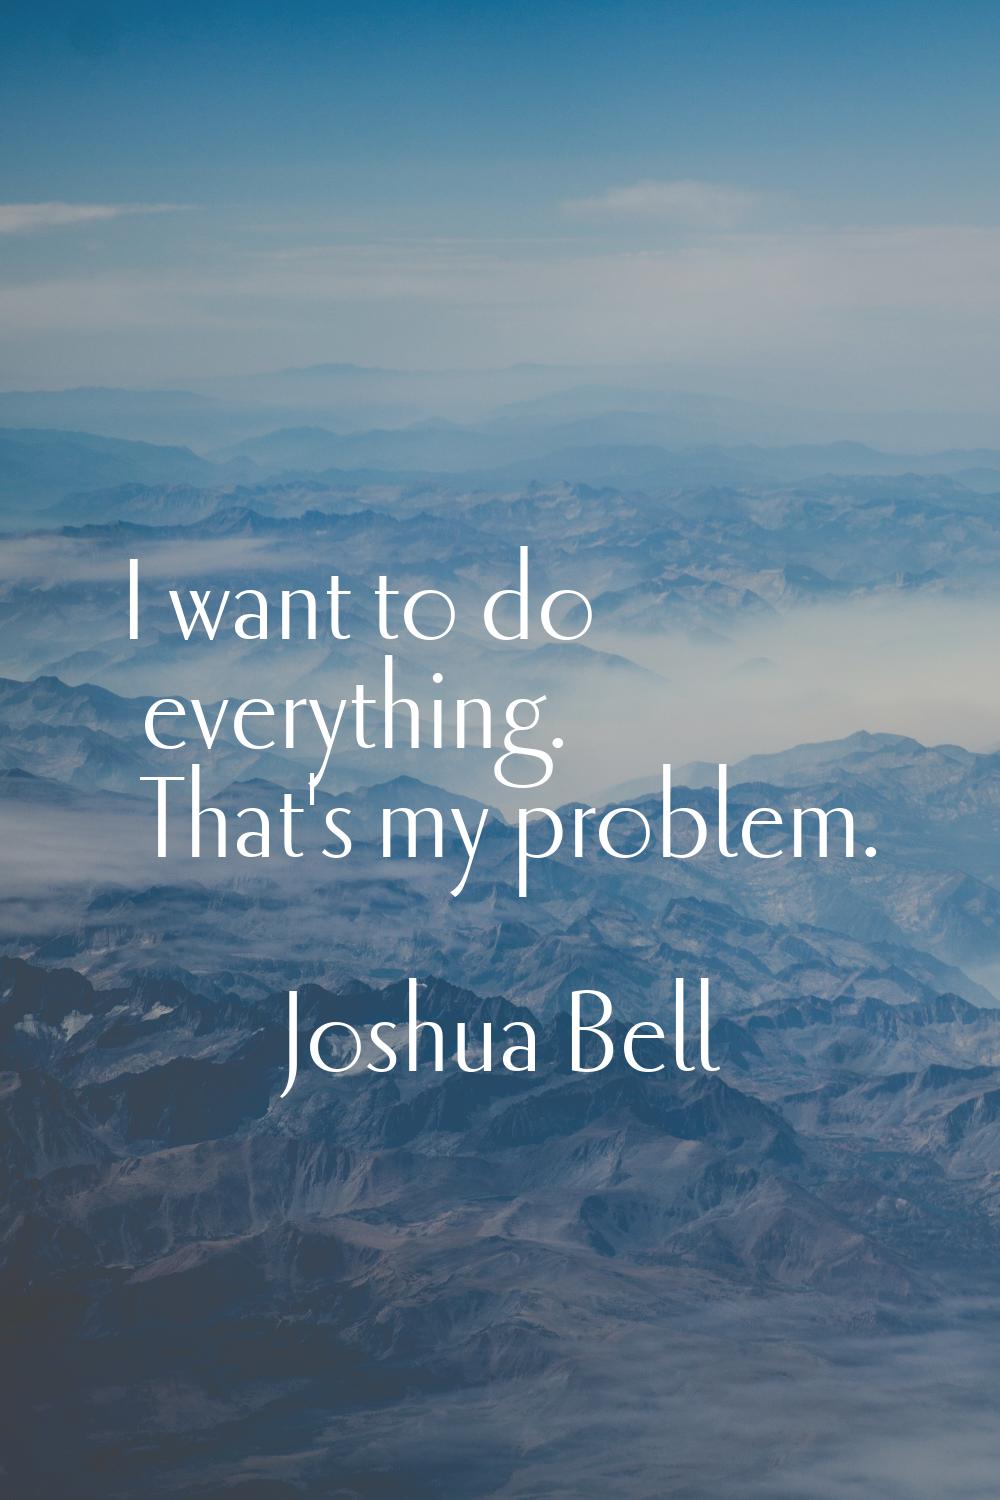 I want to do everything. That's my problem.